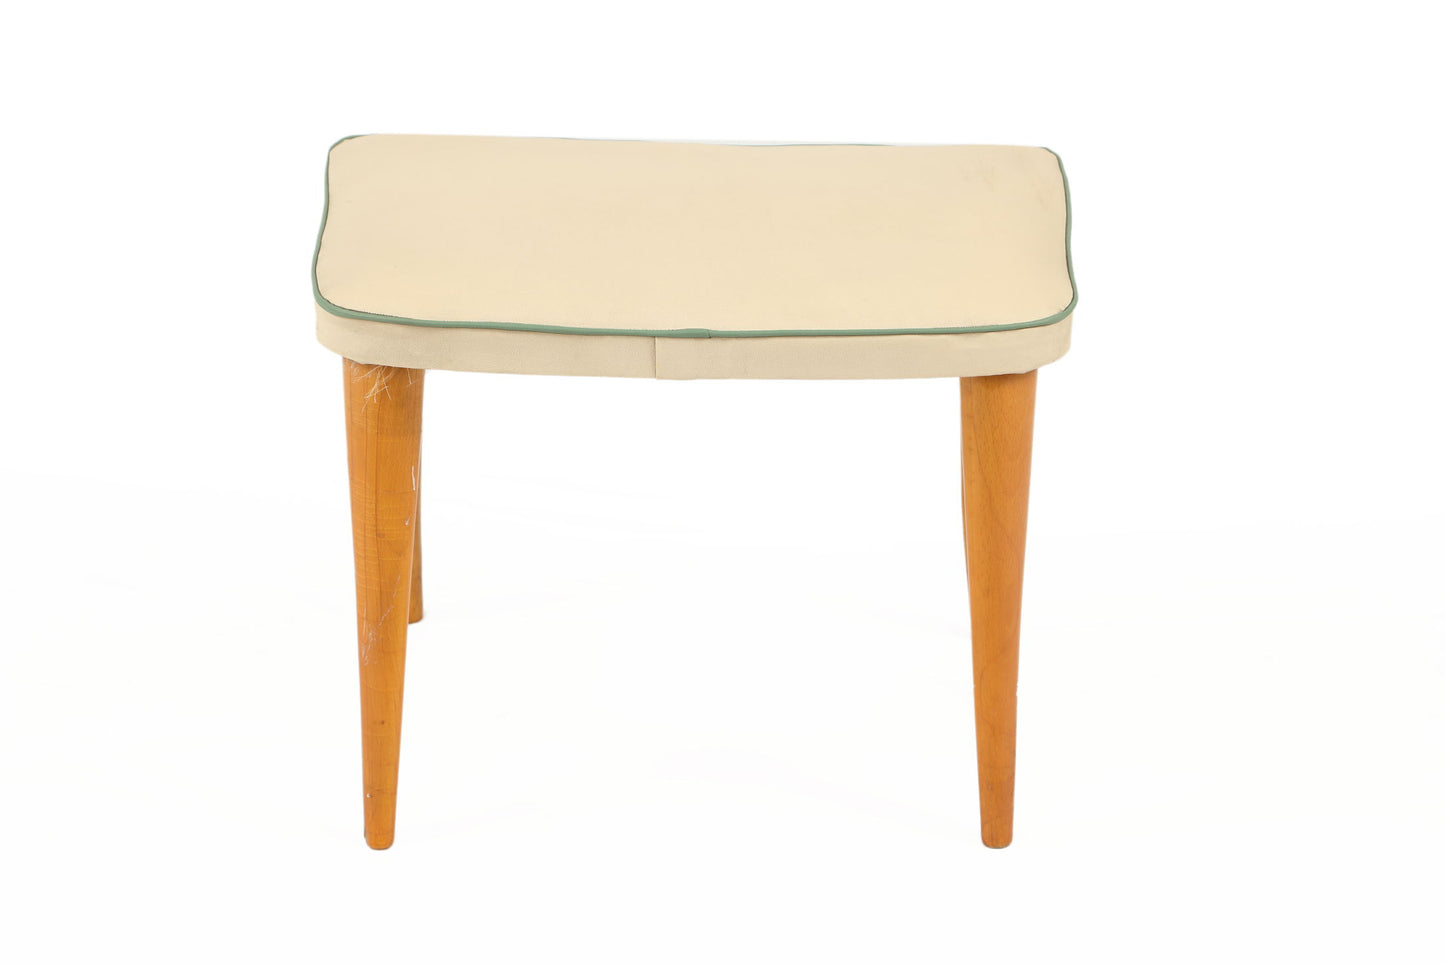 Pair of small benches from the 60s in ivory skai